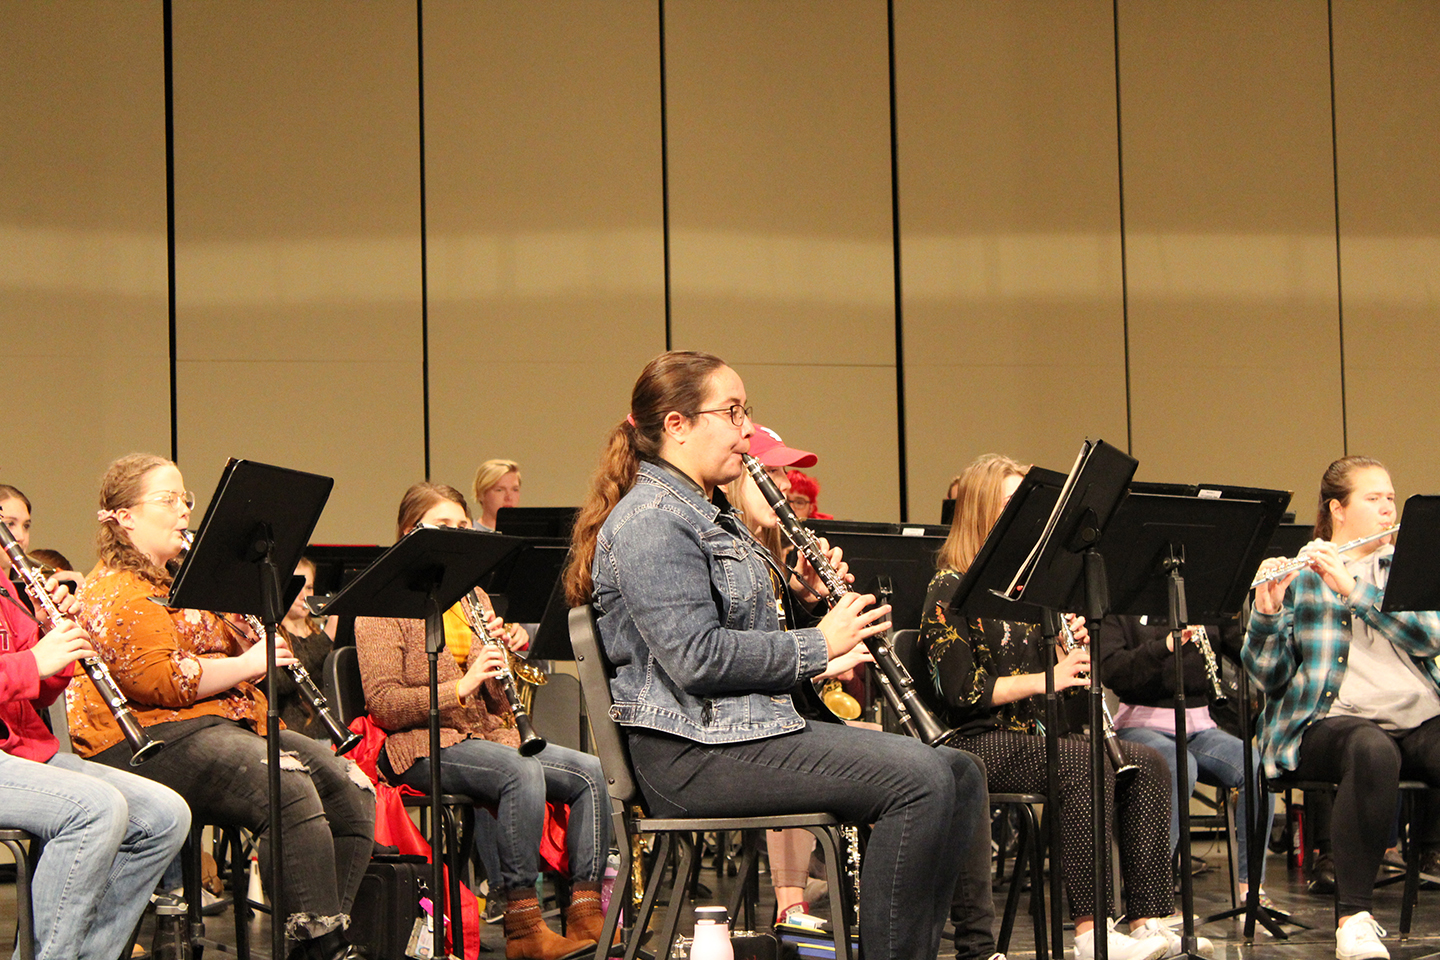 USD Concert Band and Symphonic Band Perform Together